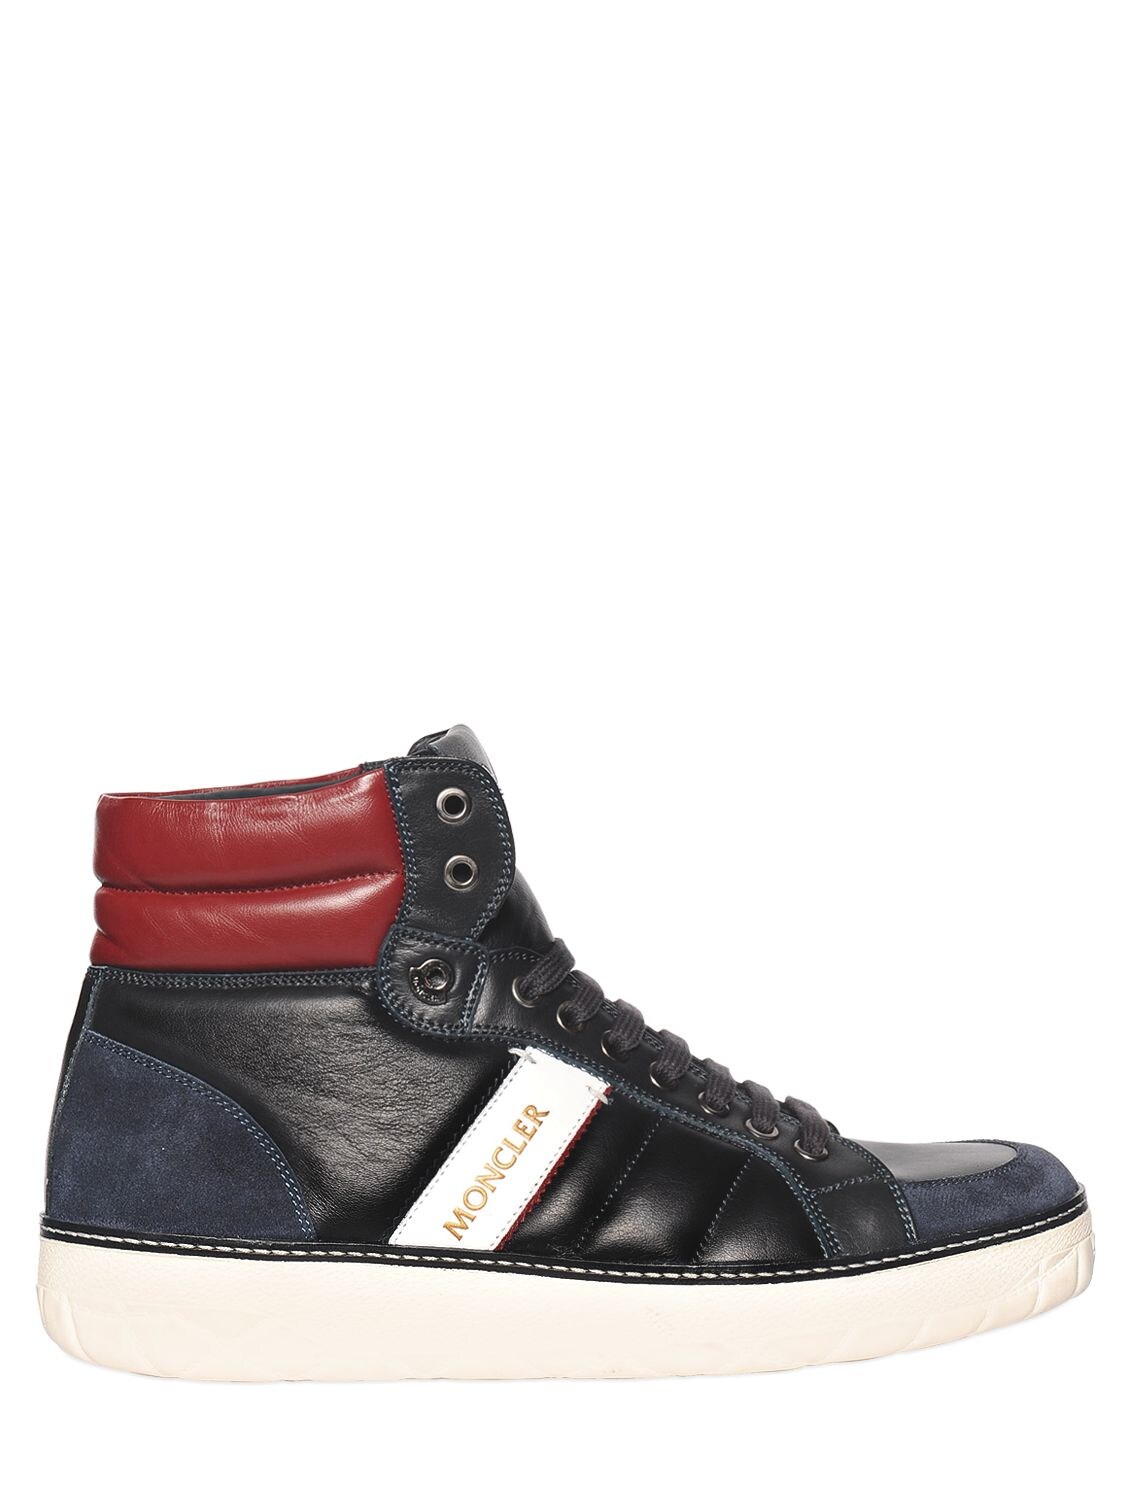 MONCLER LEATHER HIGH TOP SNEAKERS,62I0T9007-Nzc40